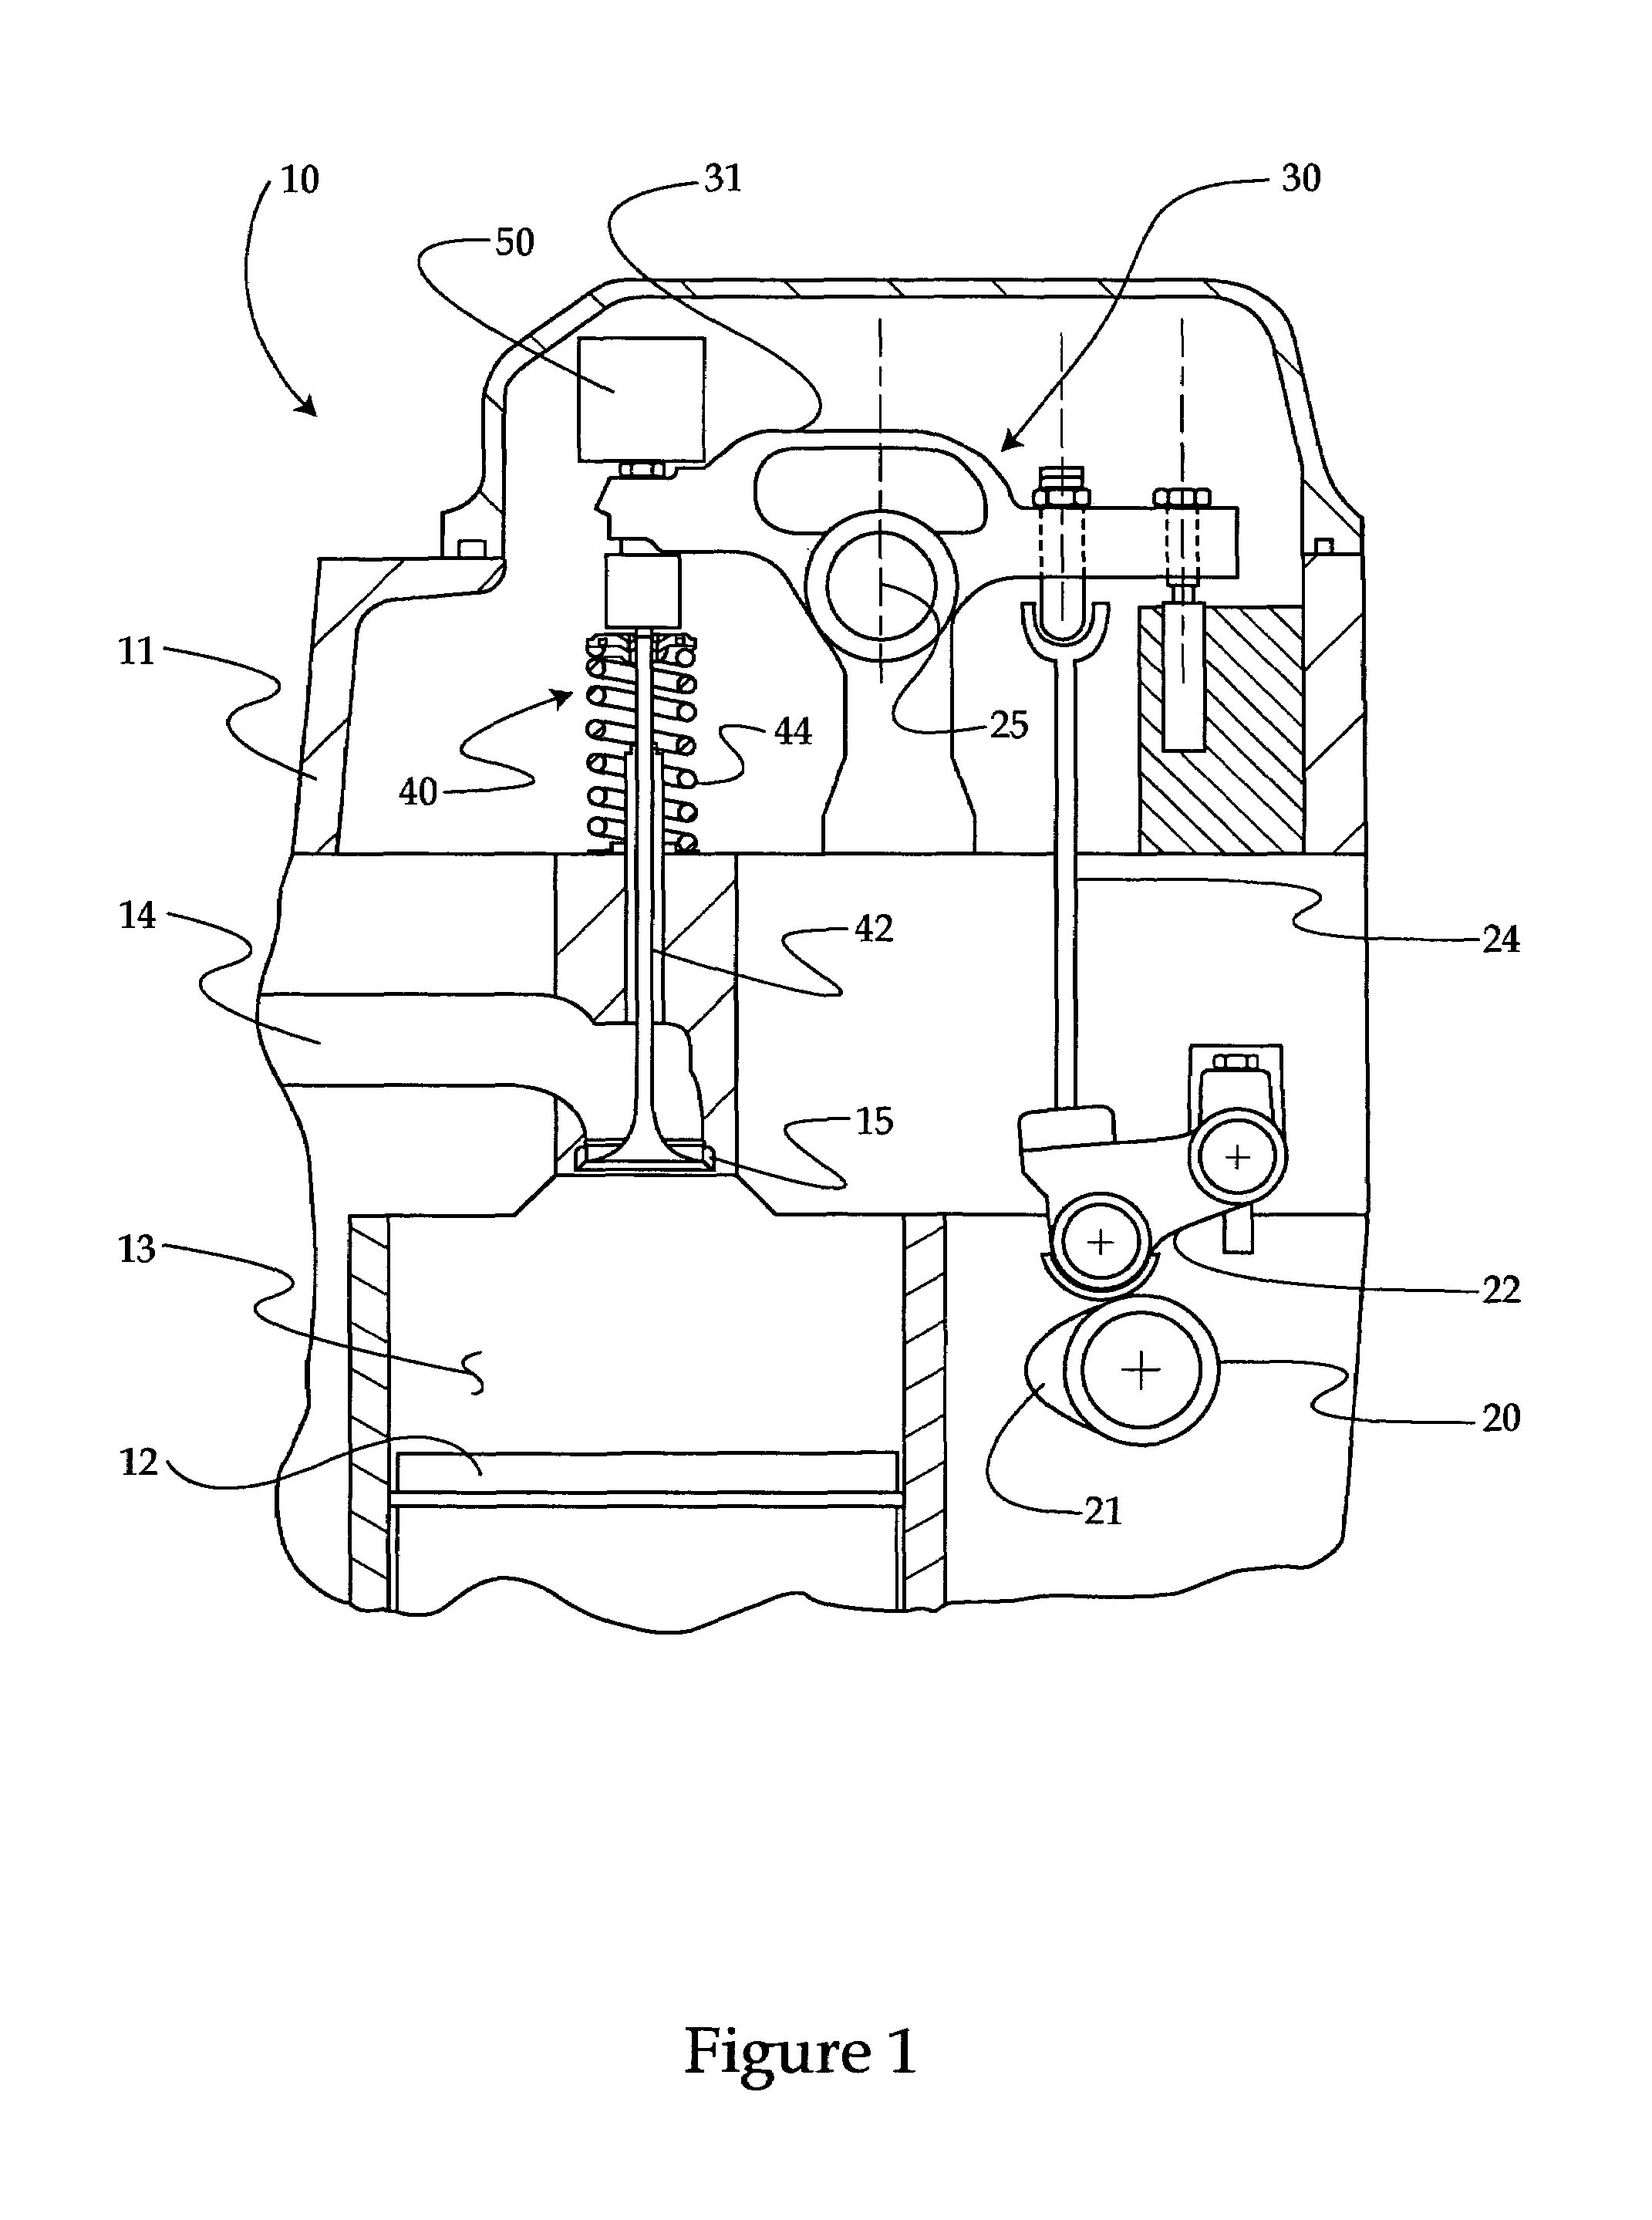 Internal combustion engine valve seating velocity control